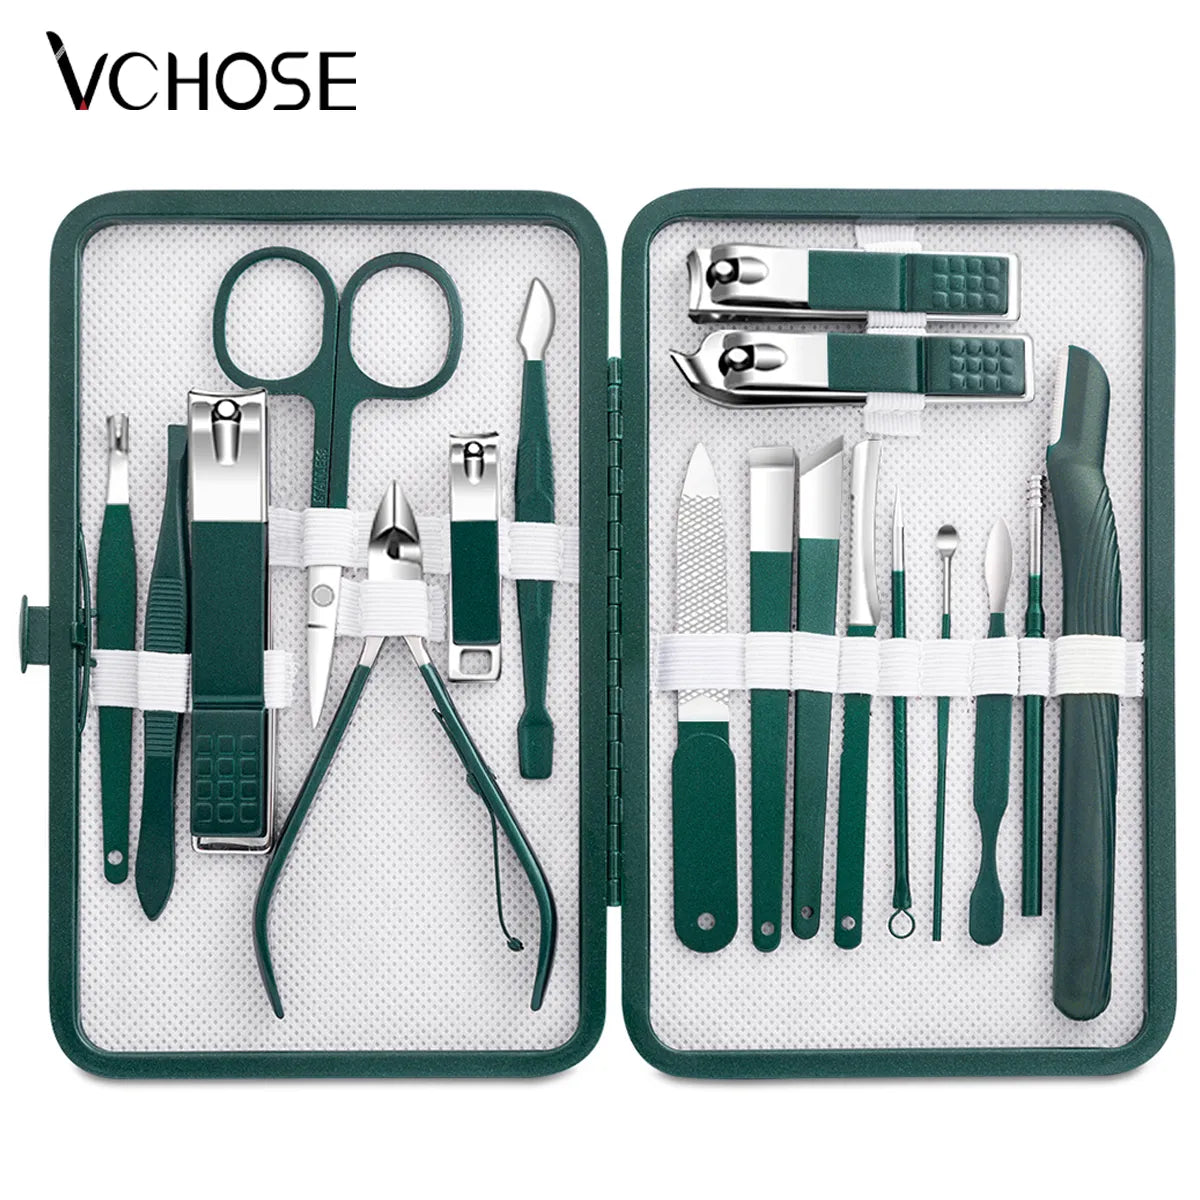 Stainless Steel Manicure Kit: Professional Grooming Set for Nails